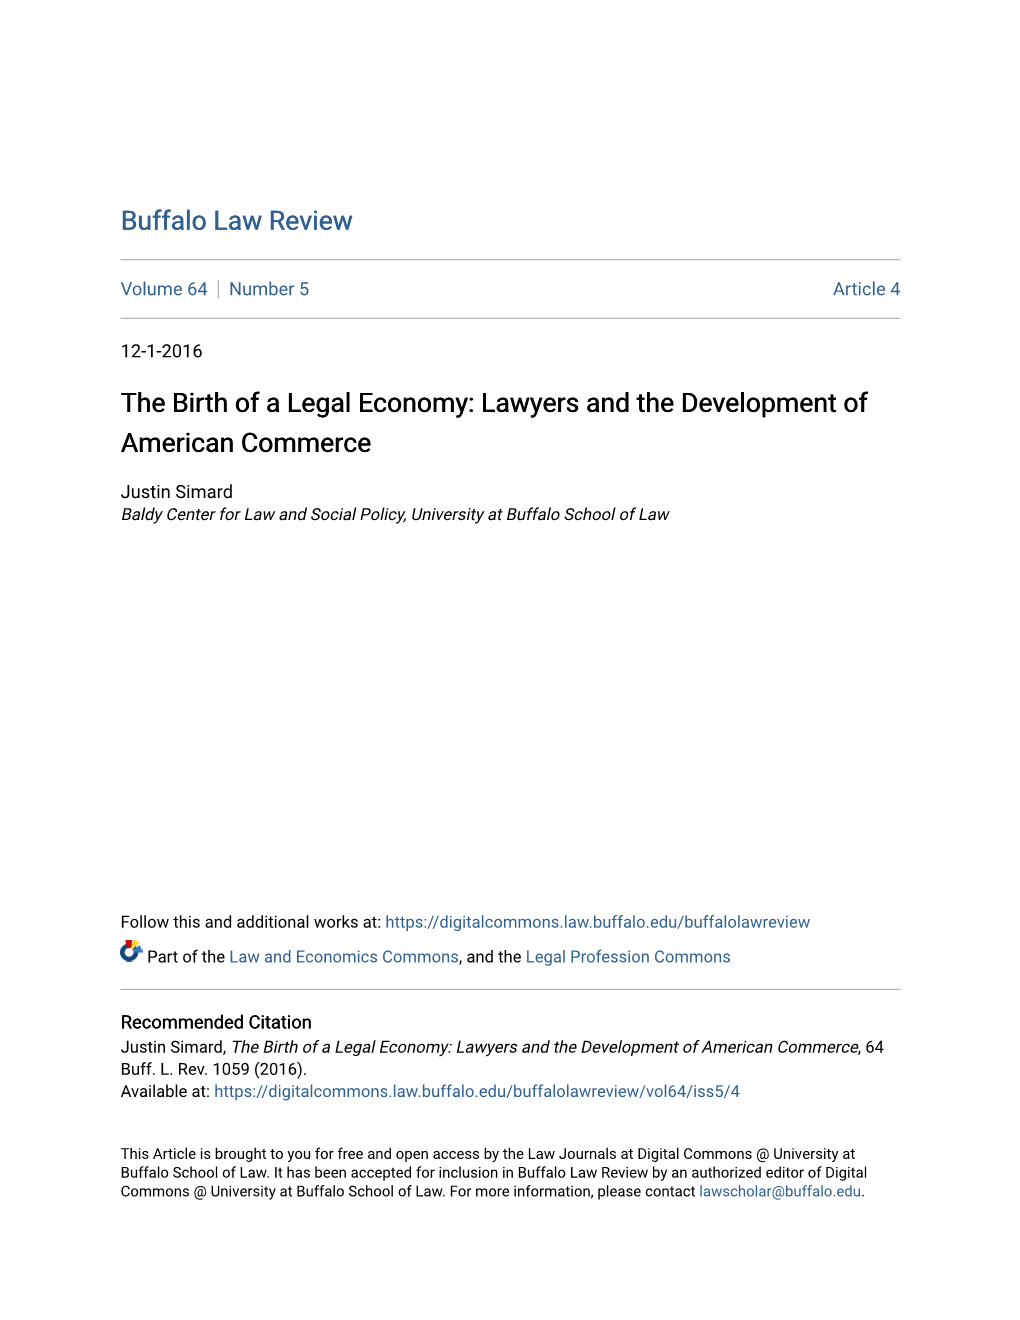 The Birth of a Legal Economy: Lawyers and the Development of American Commerce